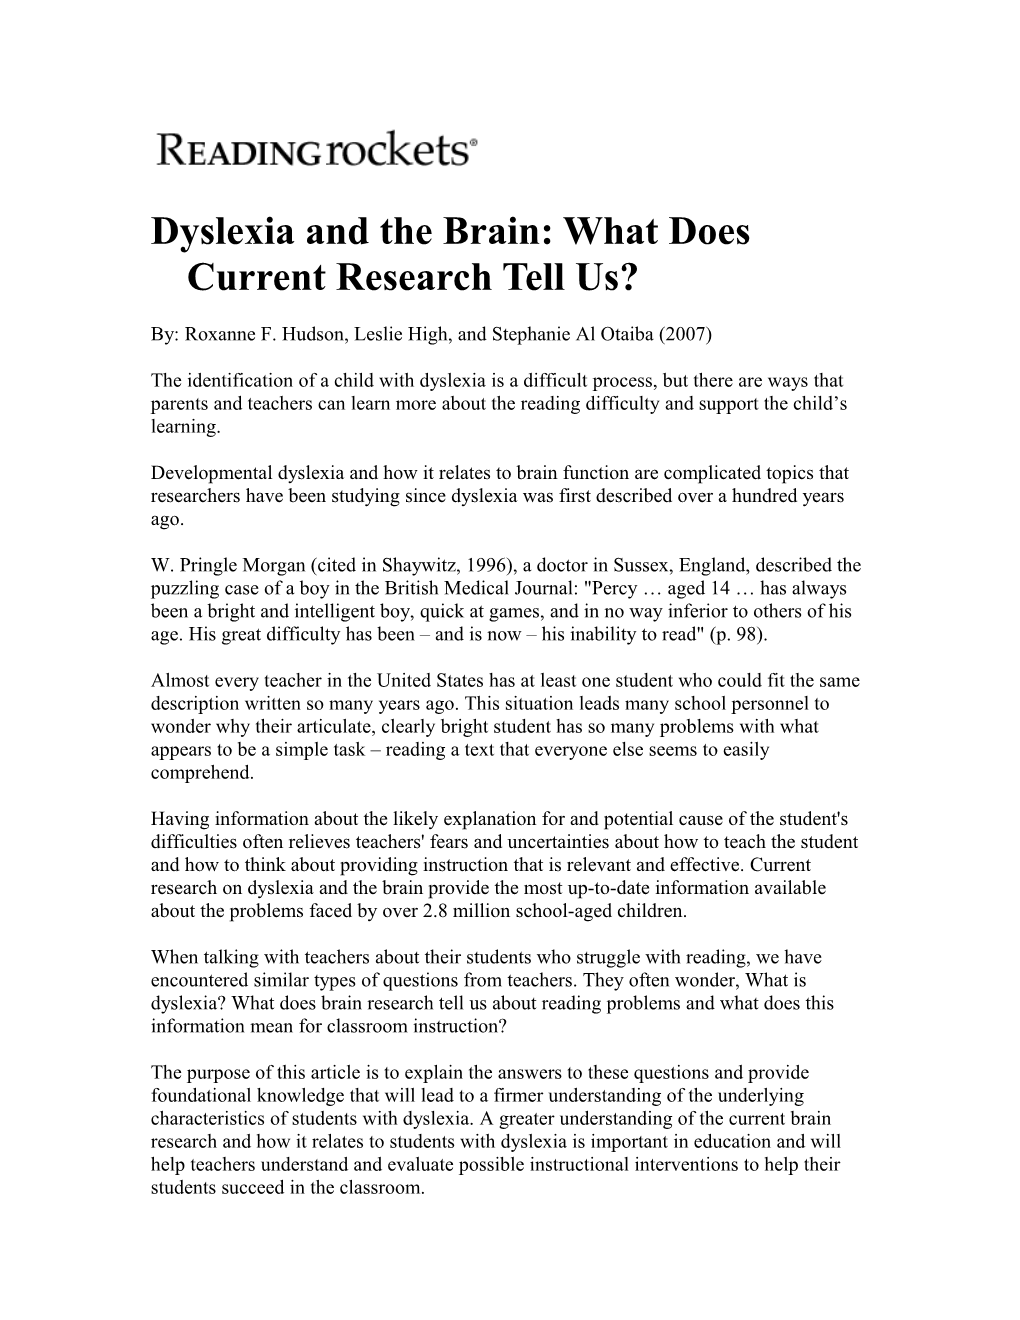 Dyslexia and the Brain: What Does Current Research Tell Us?